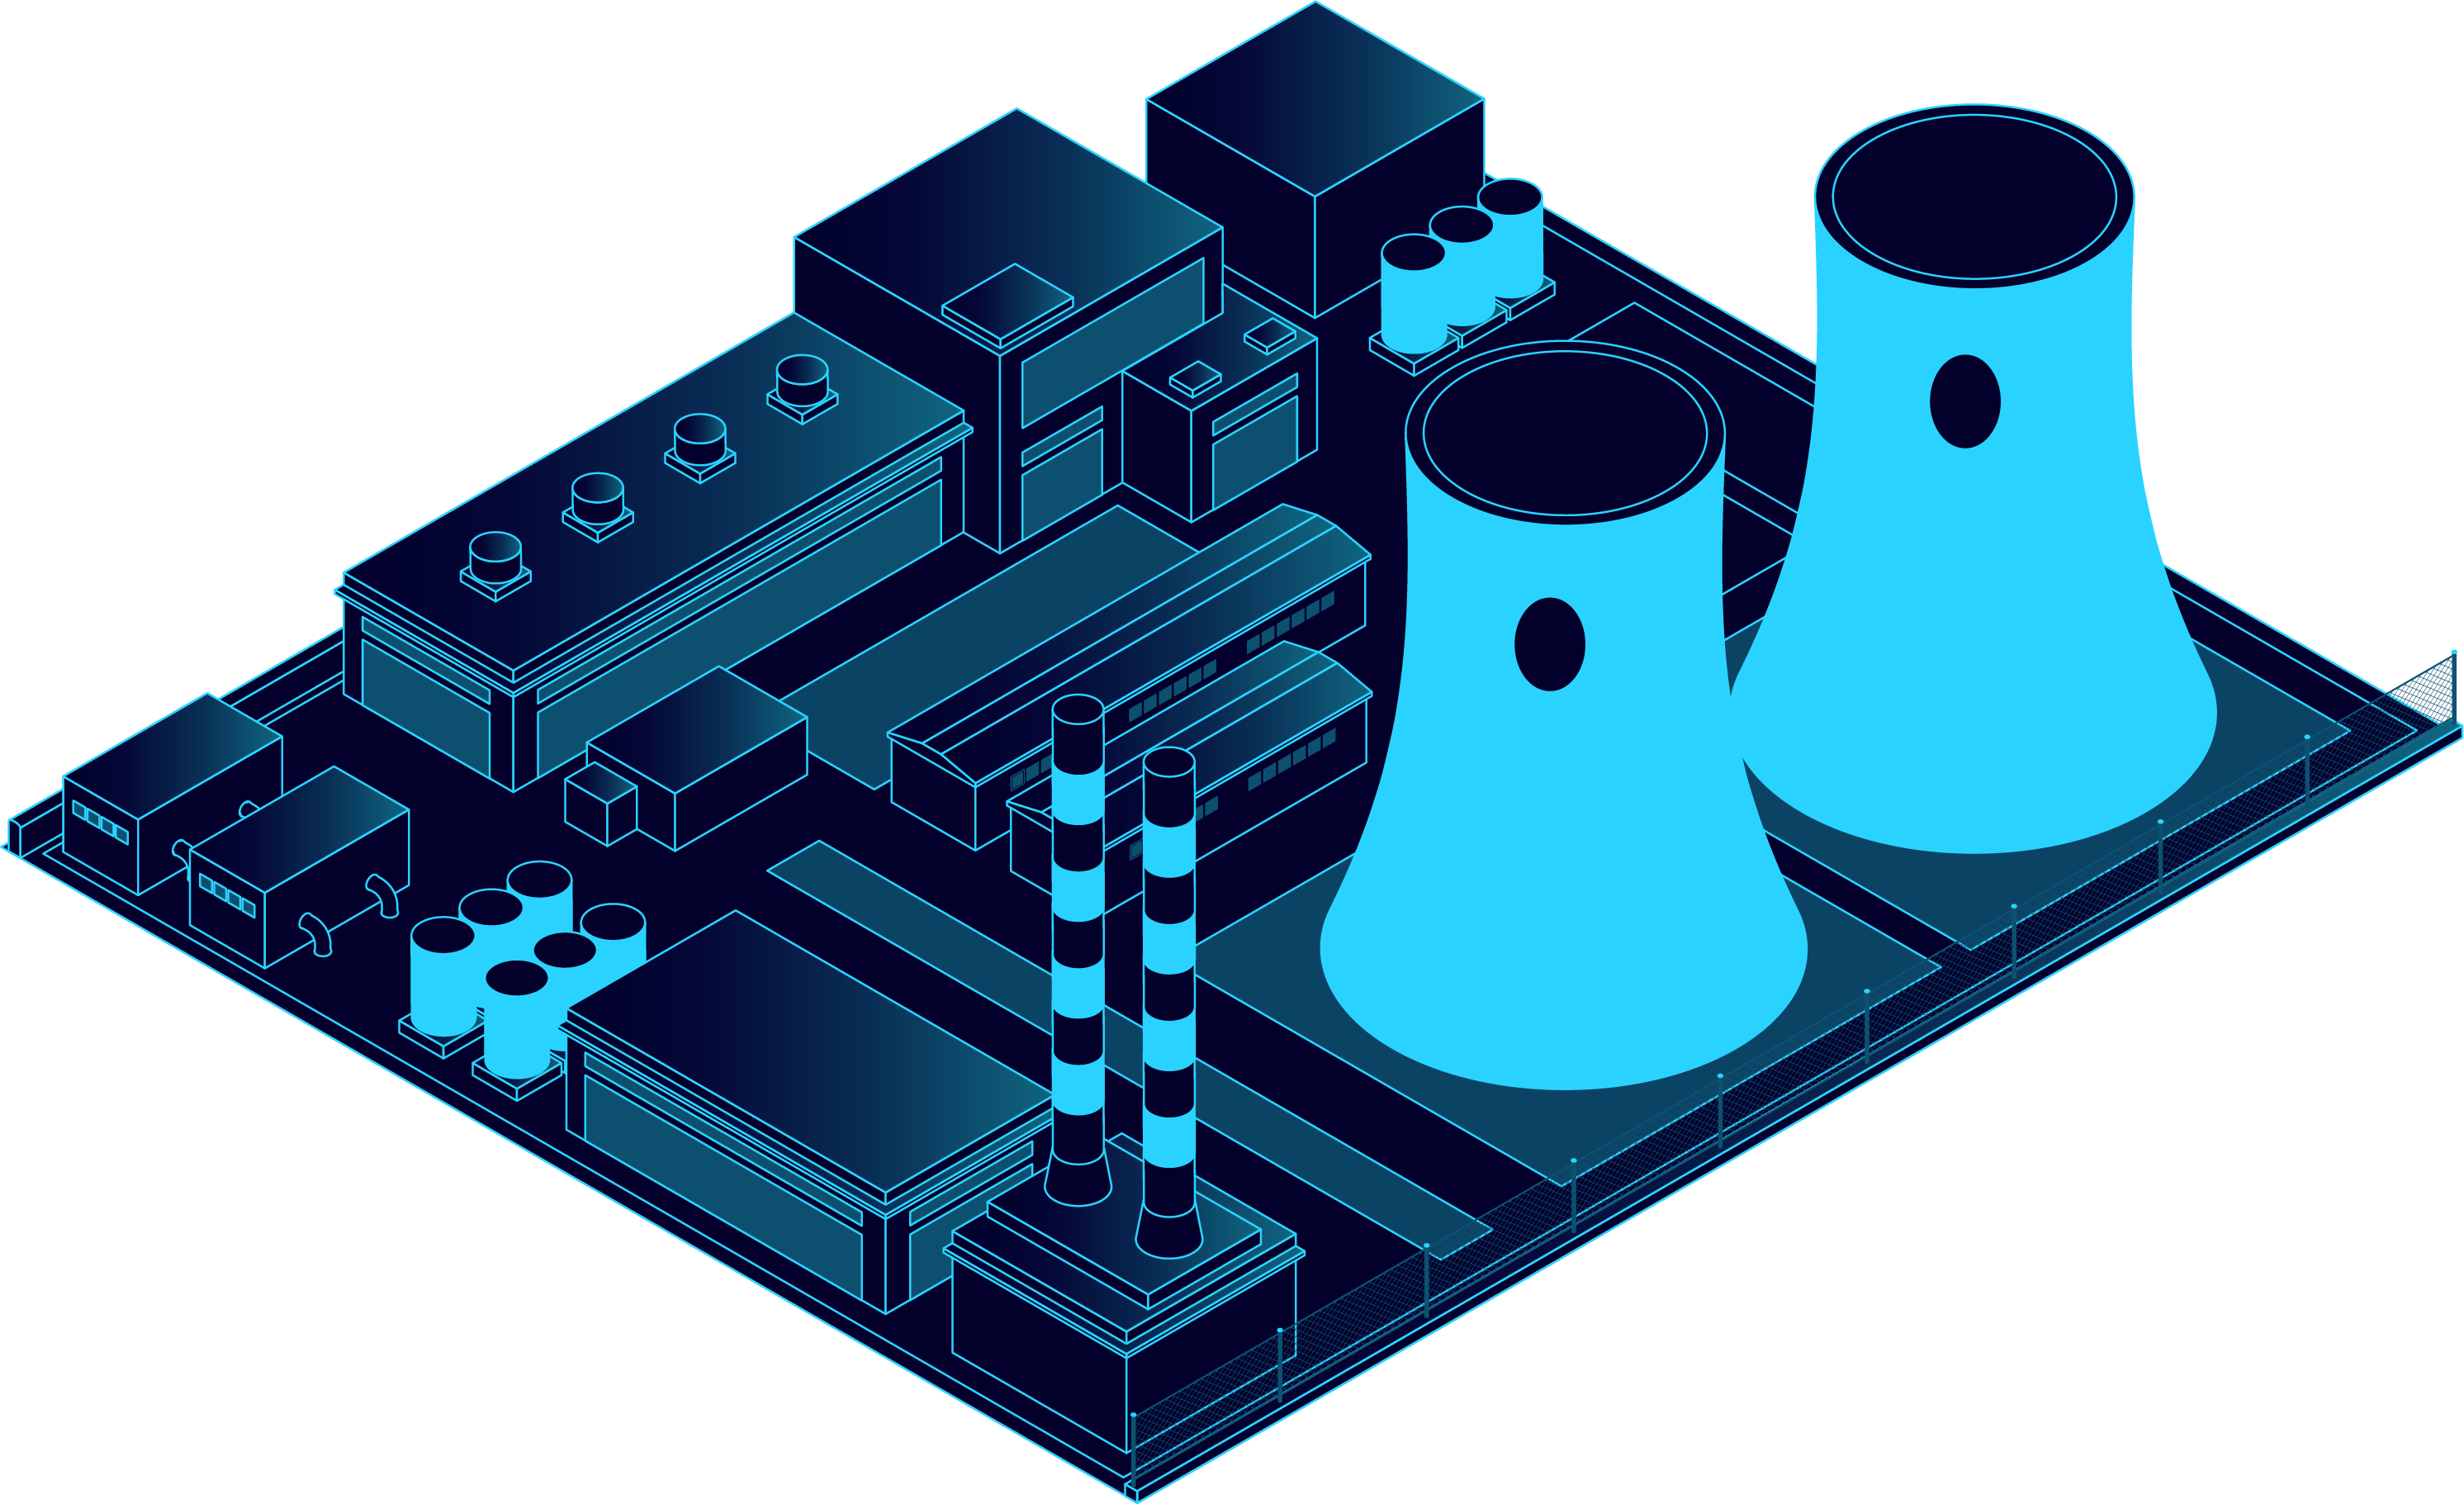 Blue floor plan of buildings and two nuclear reactor